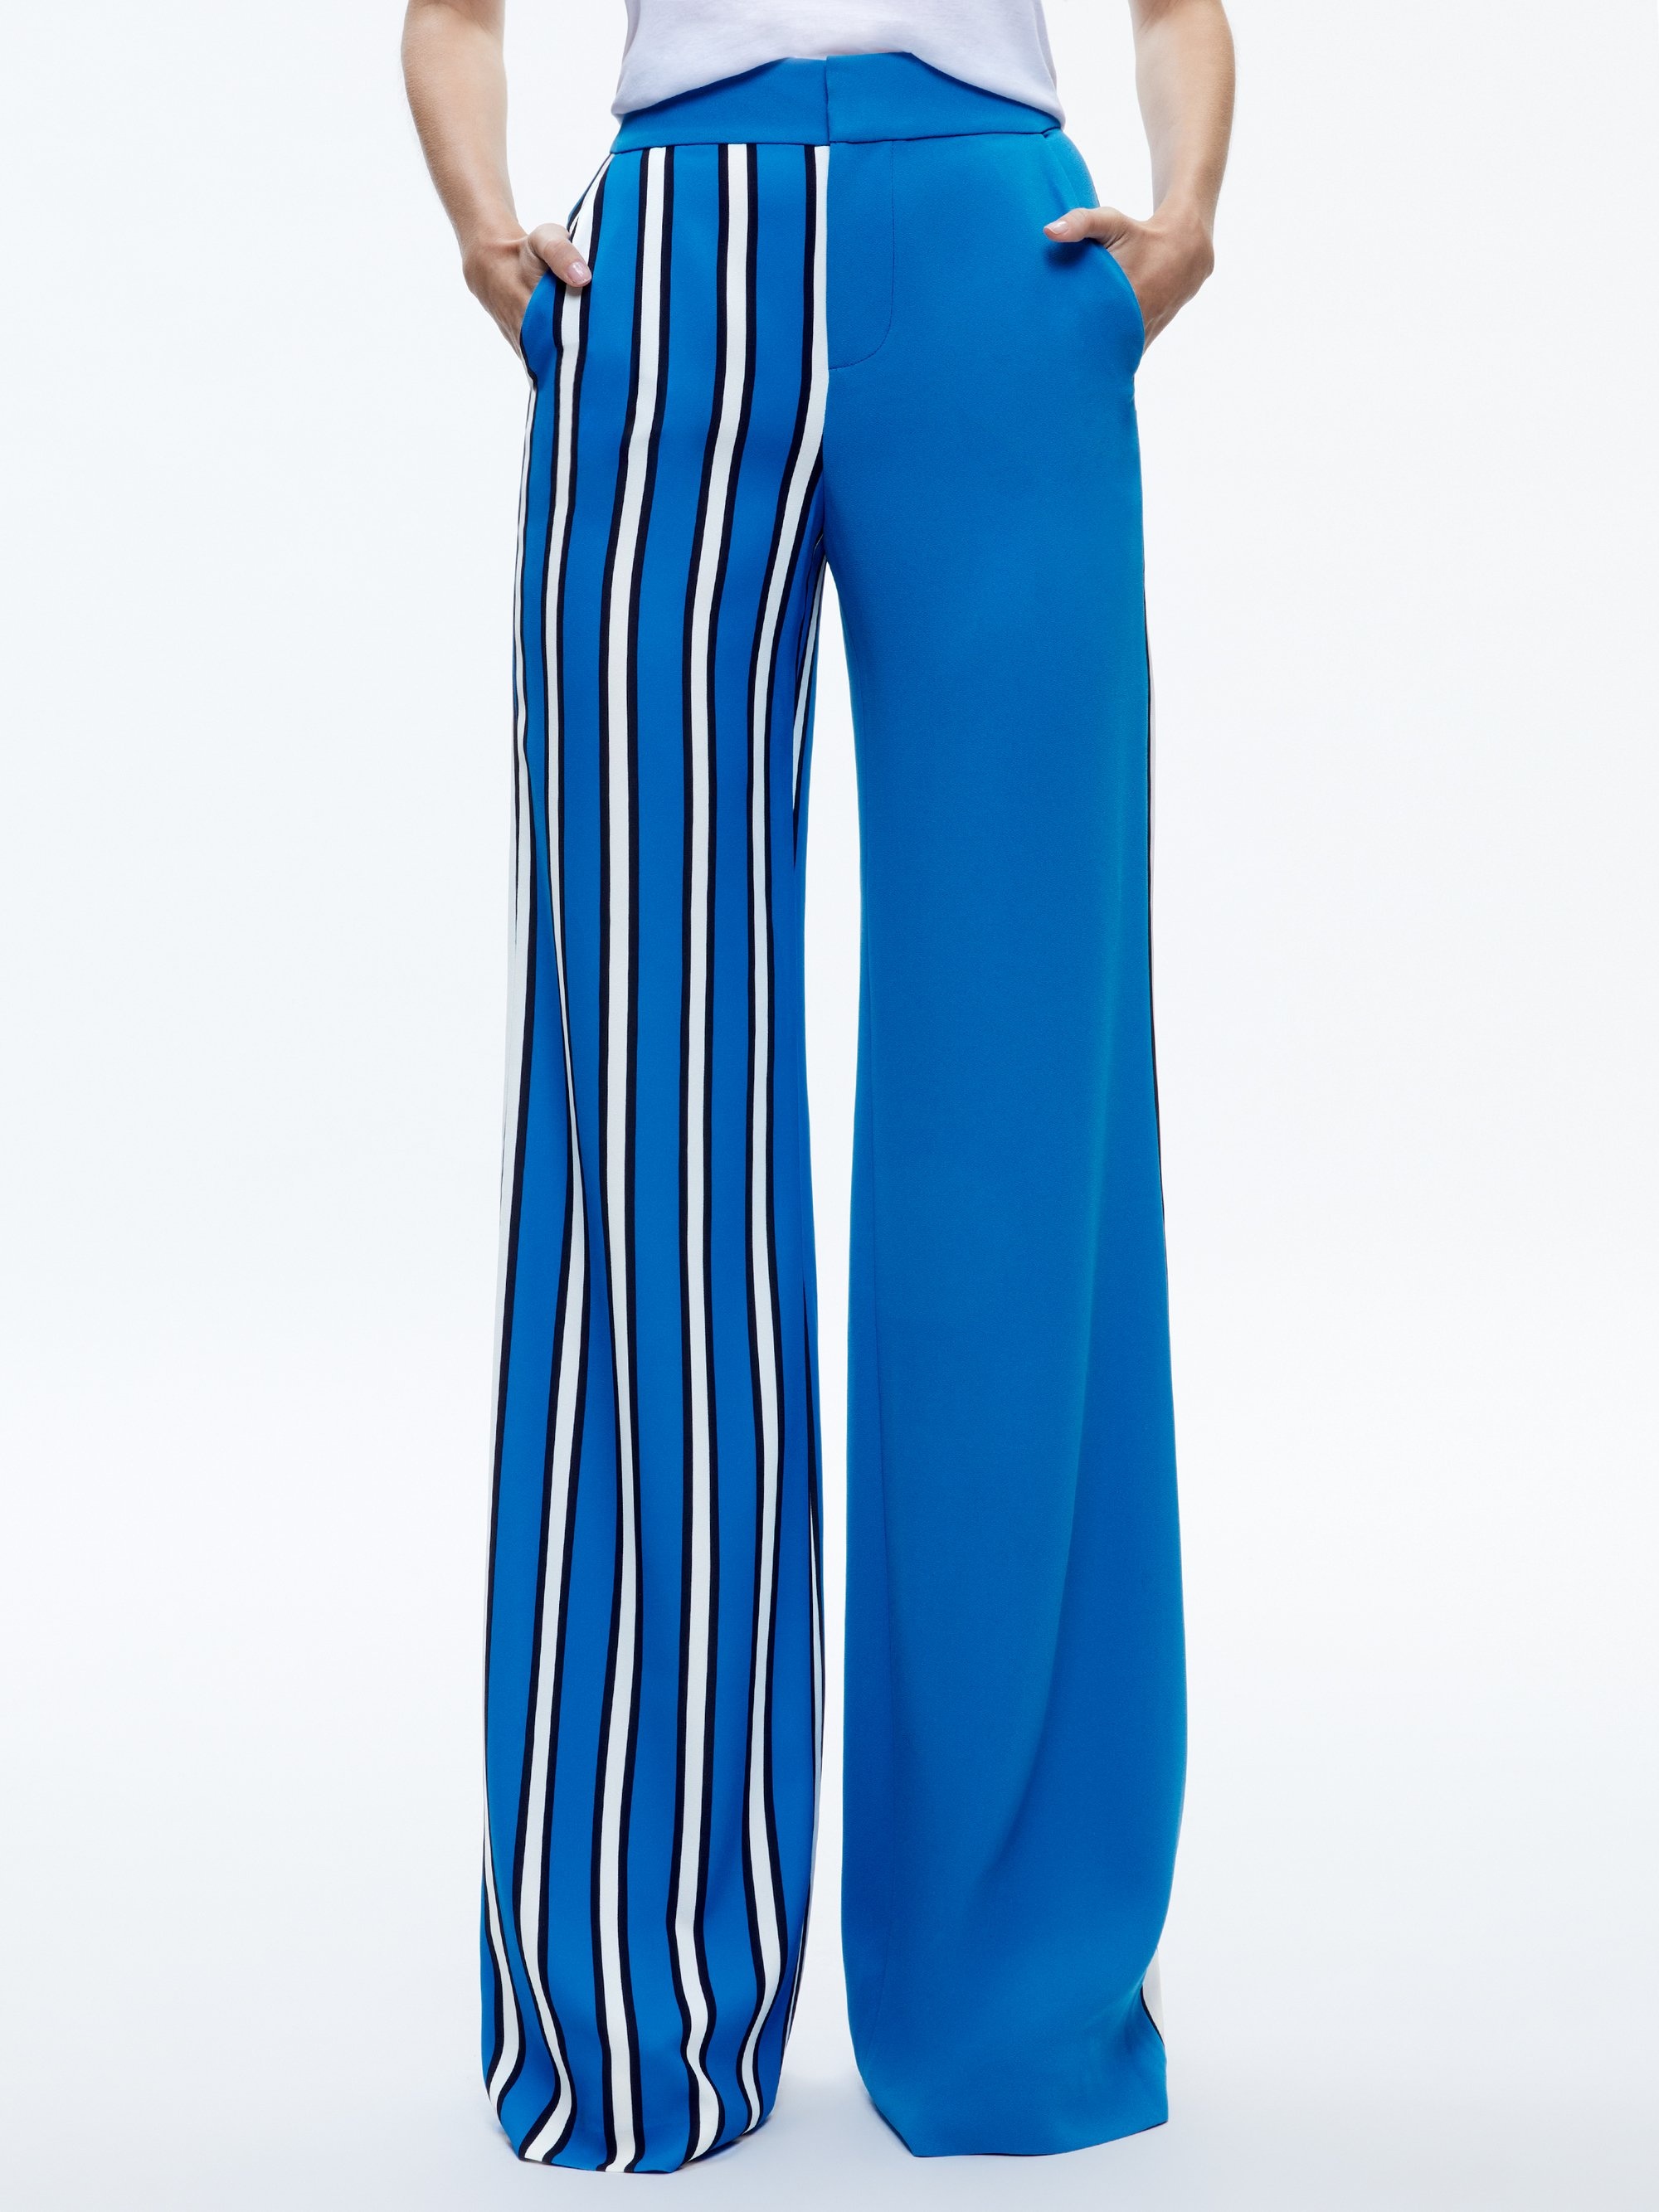 DYLAN HIGH RISE COLORBLOCK PANT - 2